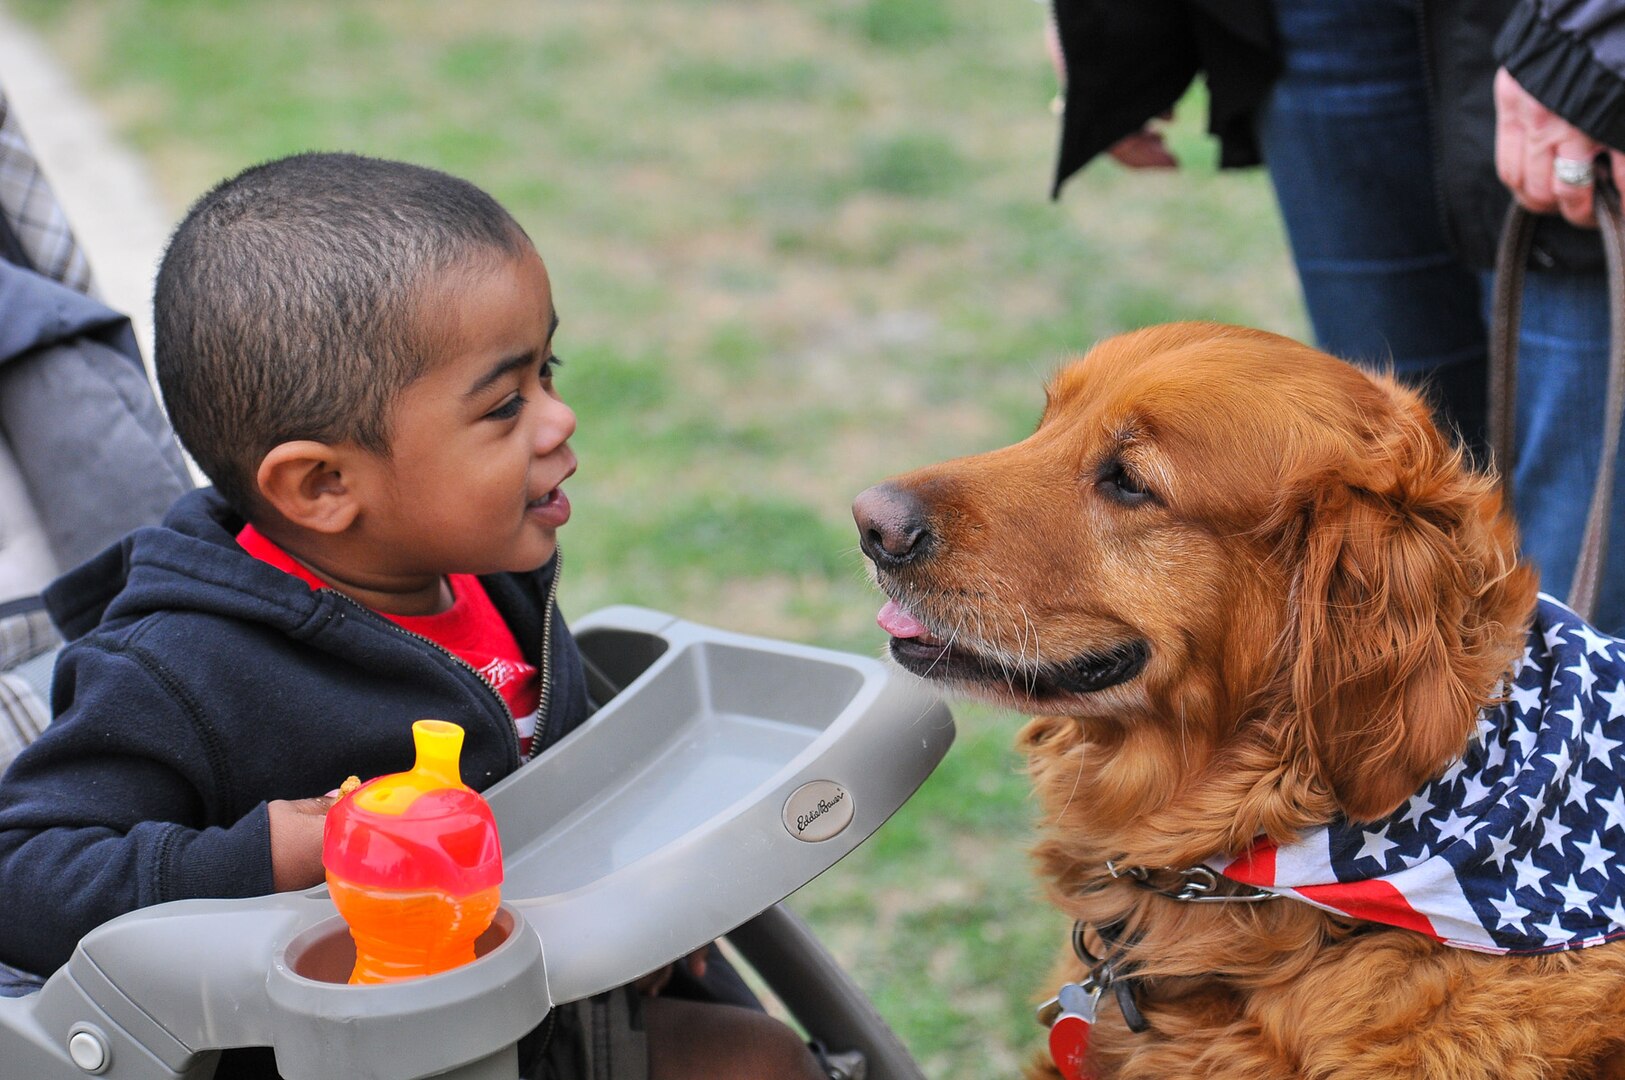 Jake, a seven-year-old golden retriever, interacts with 21-month-old Jaiden Robinson during the inaugural Air Force Intelligence, Surveillance and Reconnaissance Agency Field Day and Family Picnic honoring its deployed members and their families at Joint Base San Antonio - Lackland, Texas April 5. Therapy dogs like Jake are being used by an increasing number of agency units to help troops cope with the rigors of military life. (U.S. Air Force photo by William Belcher)  